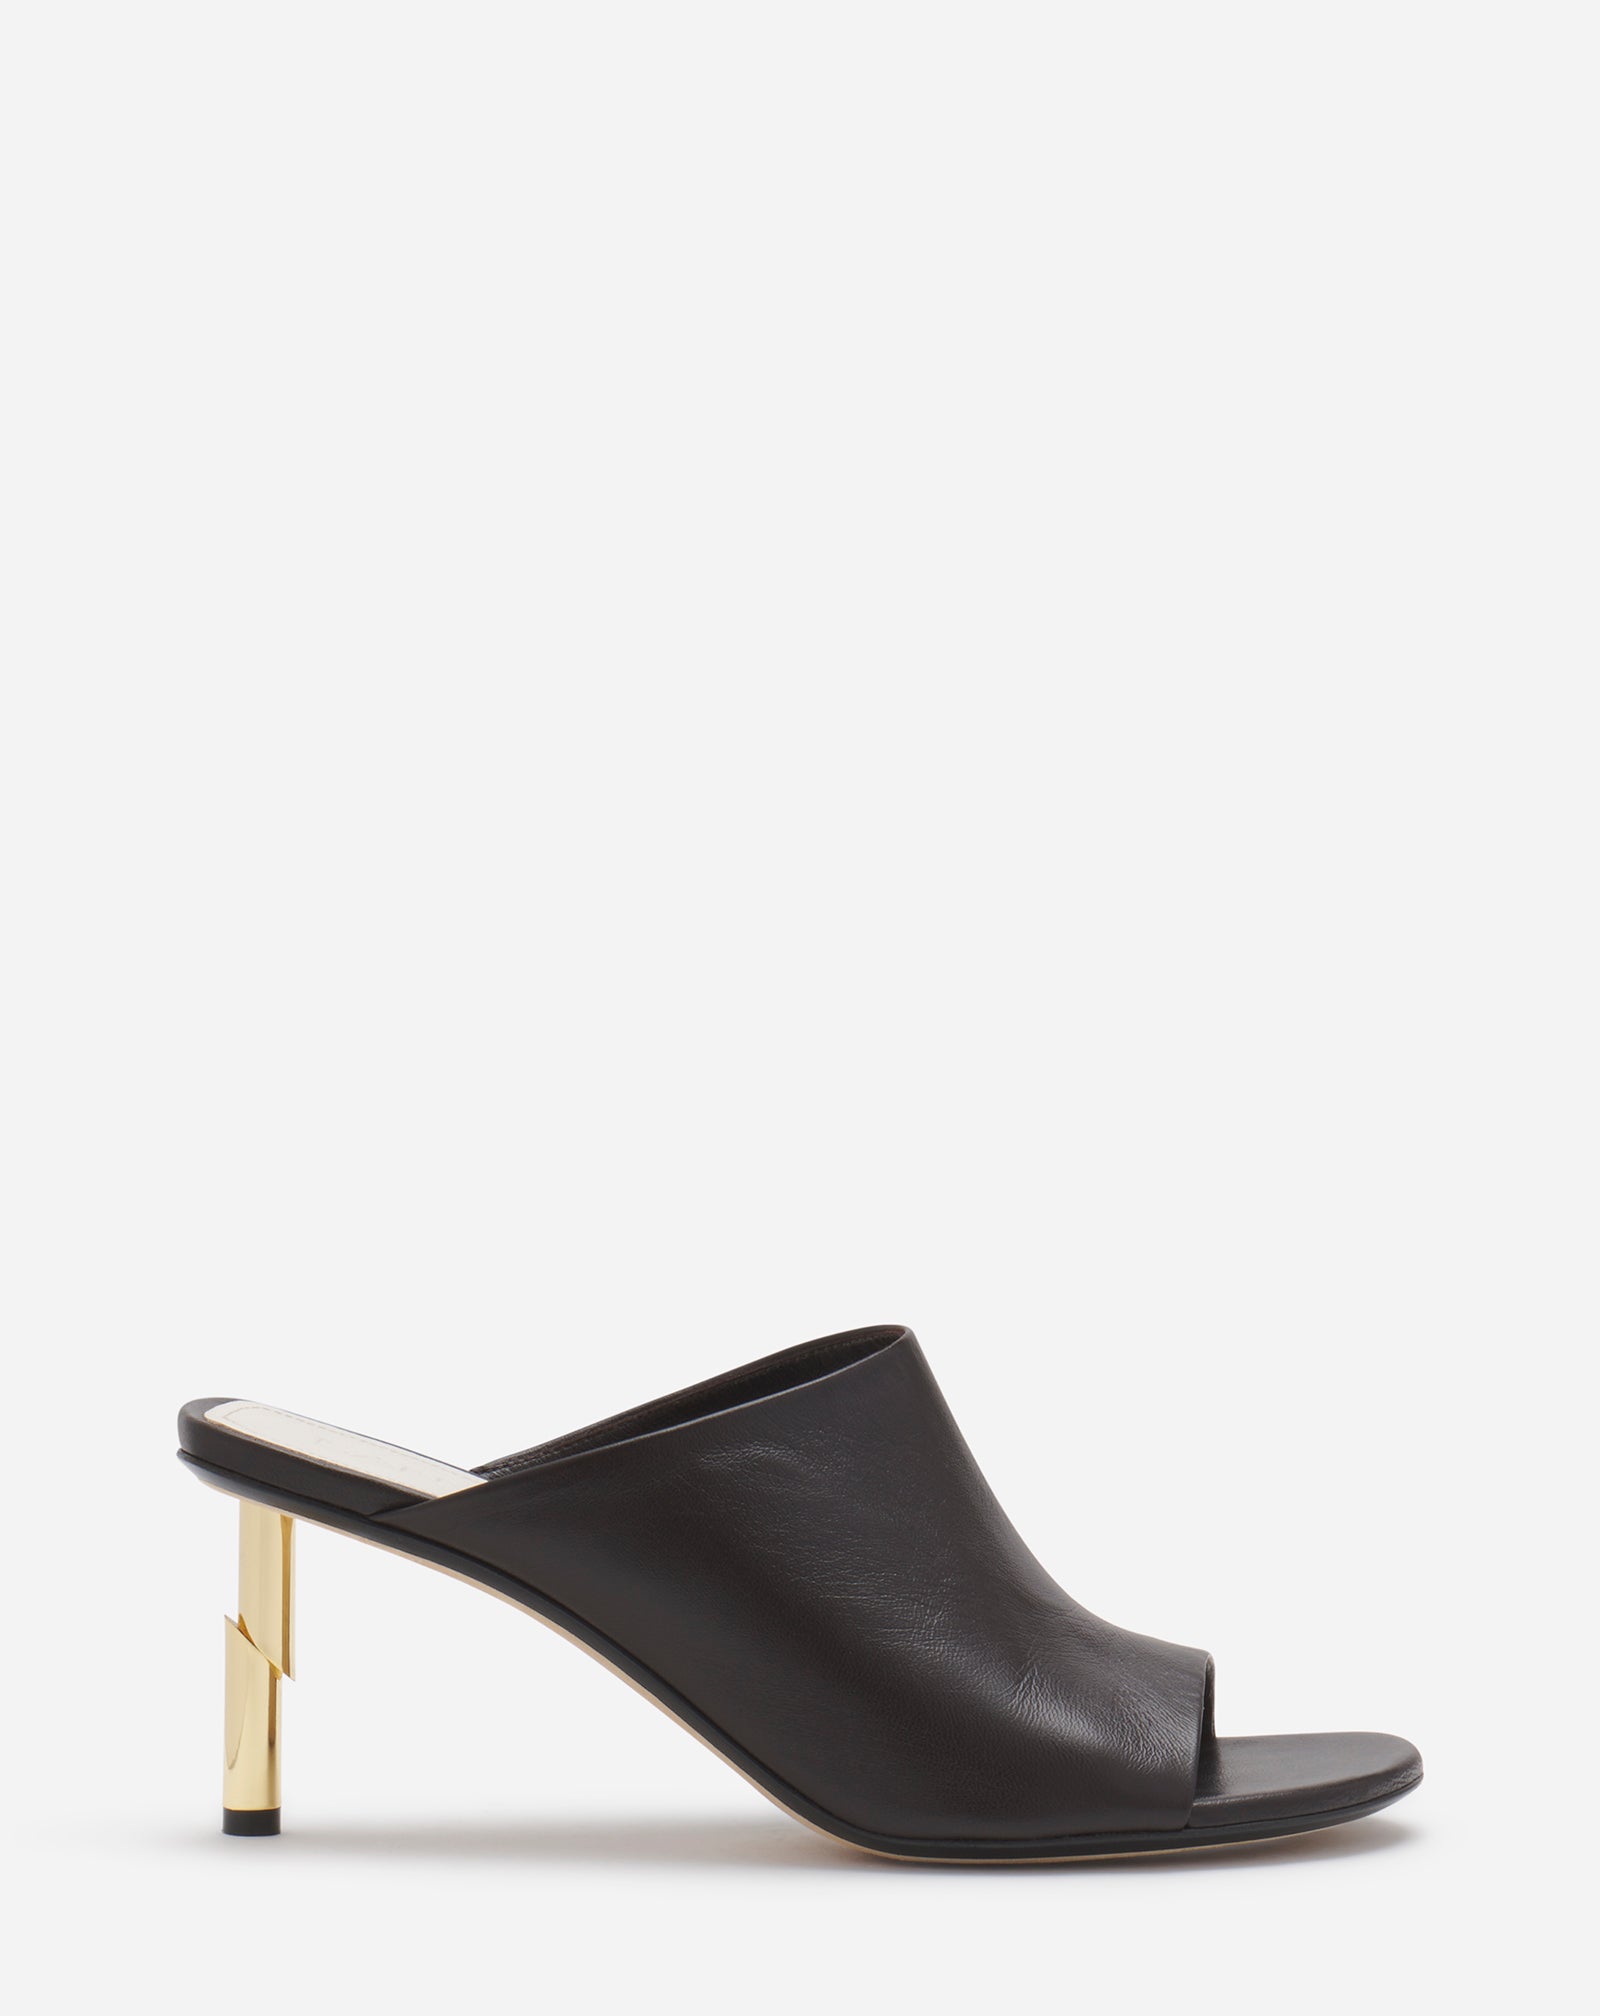 LEATHER SEQUENCE BY LANVIN MULES